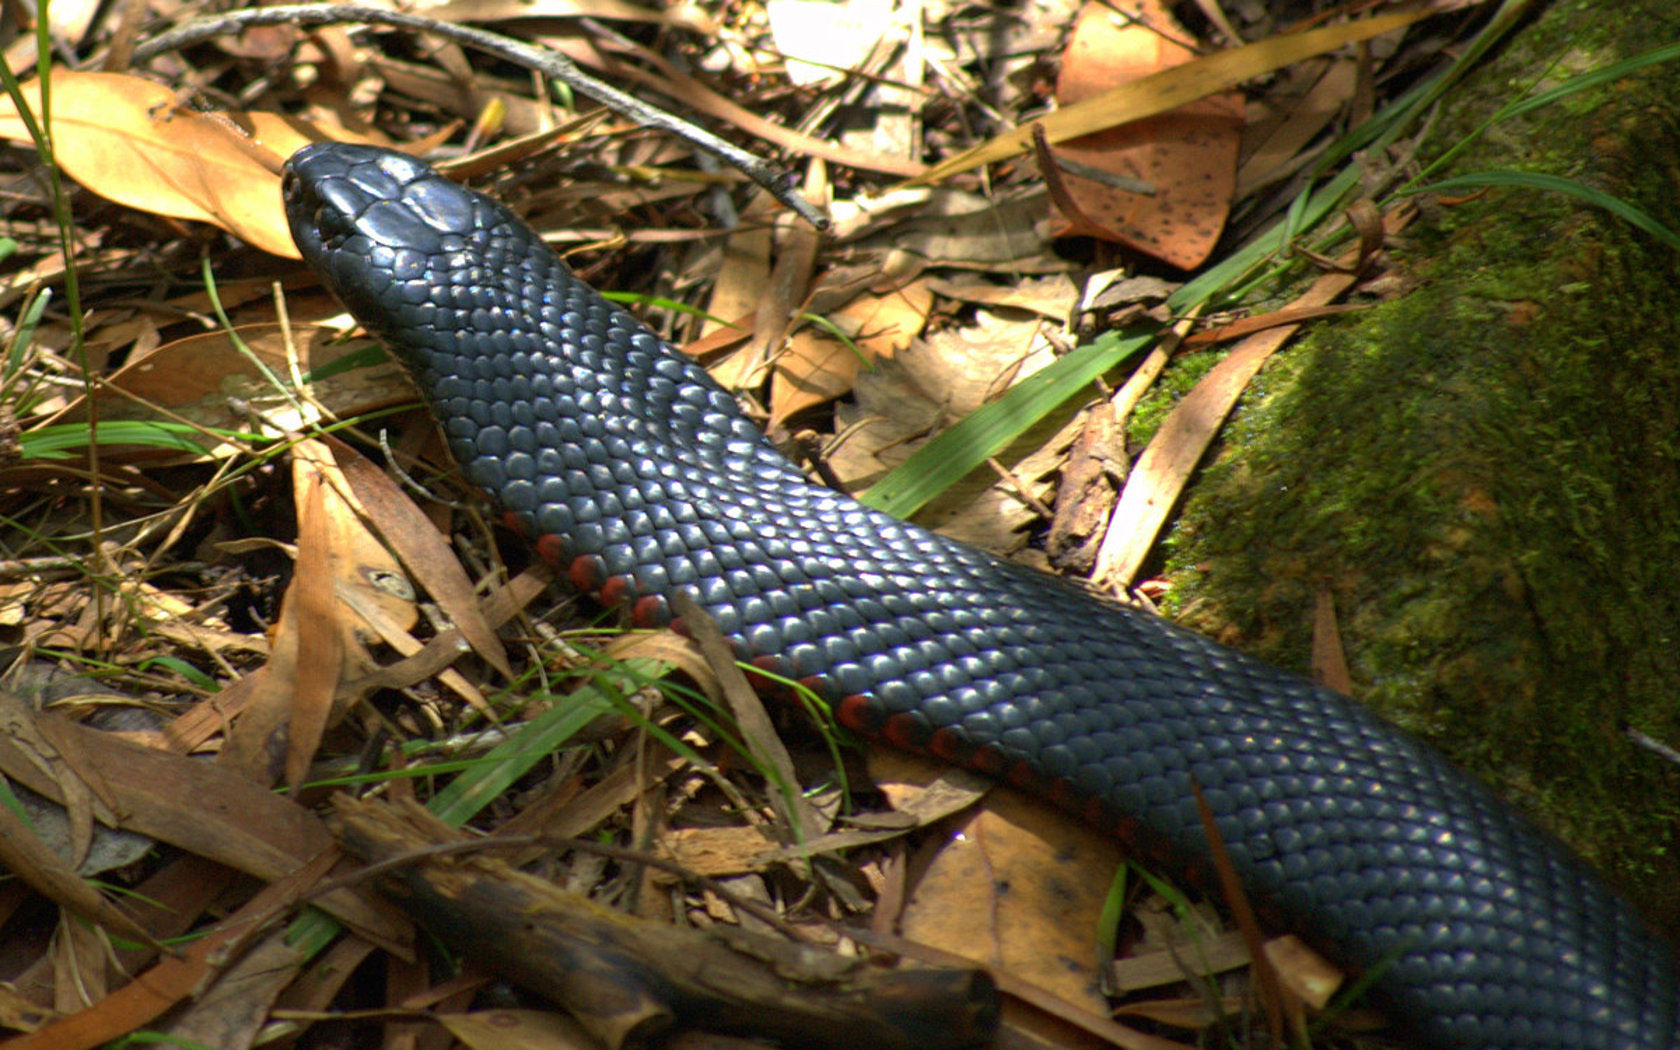 the blue snake is sitting on the ground